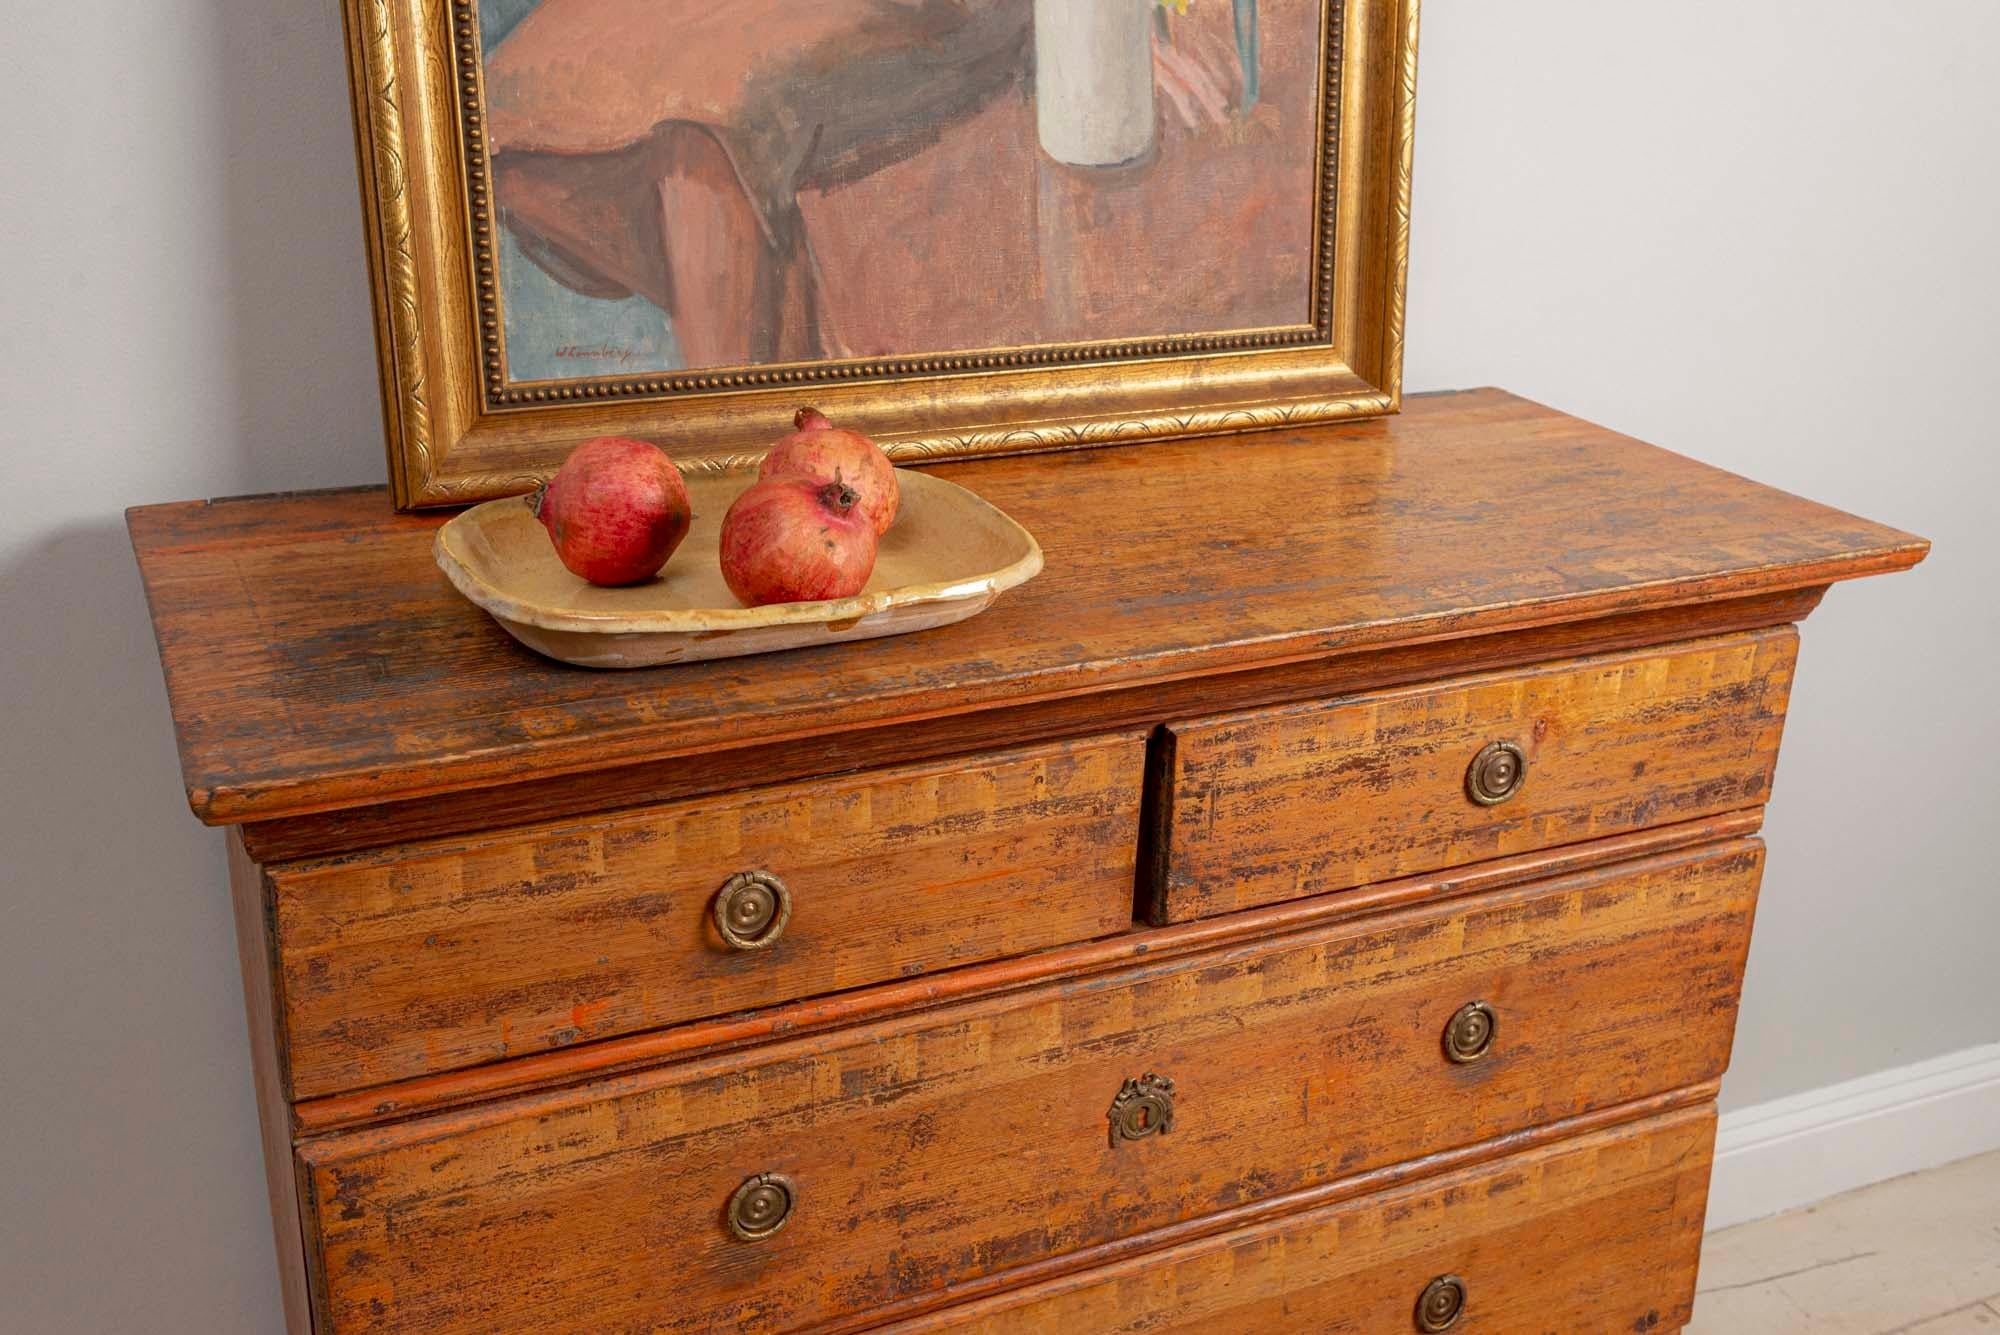 18th Century Swedish Characterful Painted 'Folk' Chest of Drawers or Commode 1